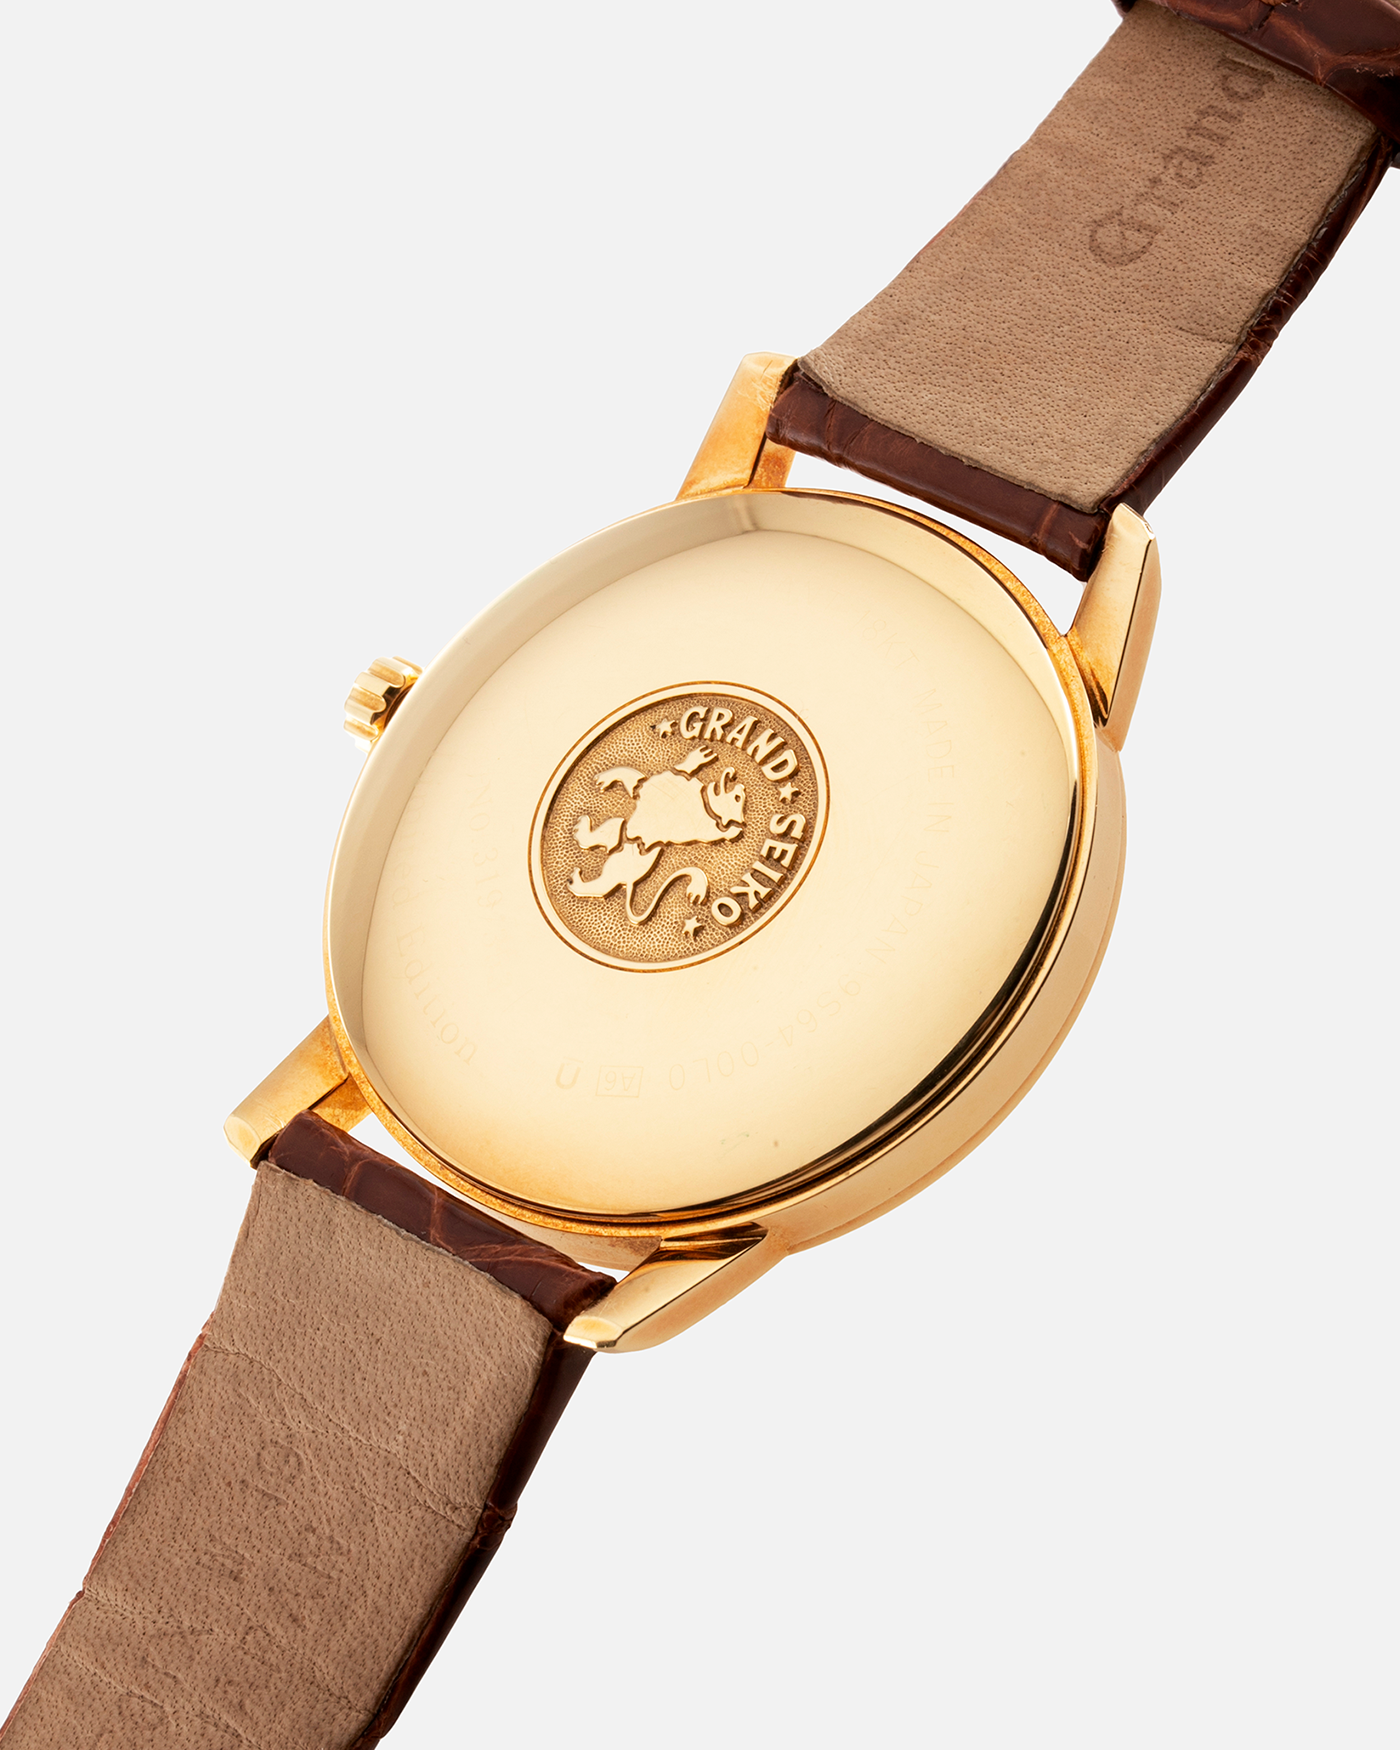 Brand: Grand Seiko Year: 2017 Model: SBGW252 Material: 18k Yellow Gold Movement: Manually wound Grand Seiko caliber 9S64 Case Diameter: 38mm Bracelet: Grand Seiko Chestnut Alligator Strap with 18k Yellow Gold Tang Buckle 